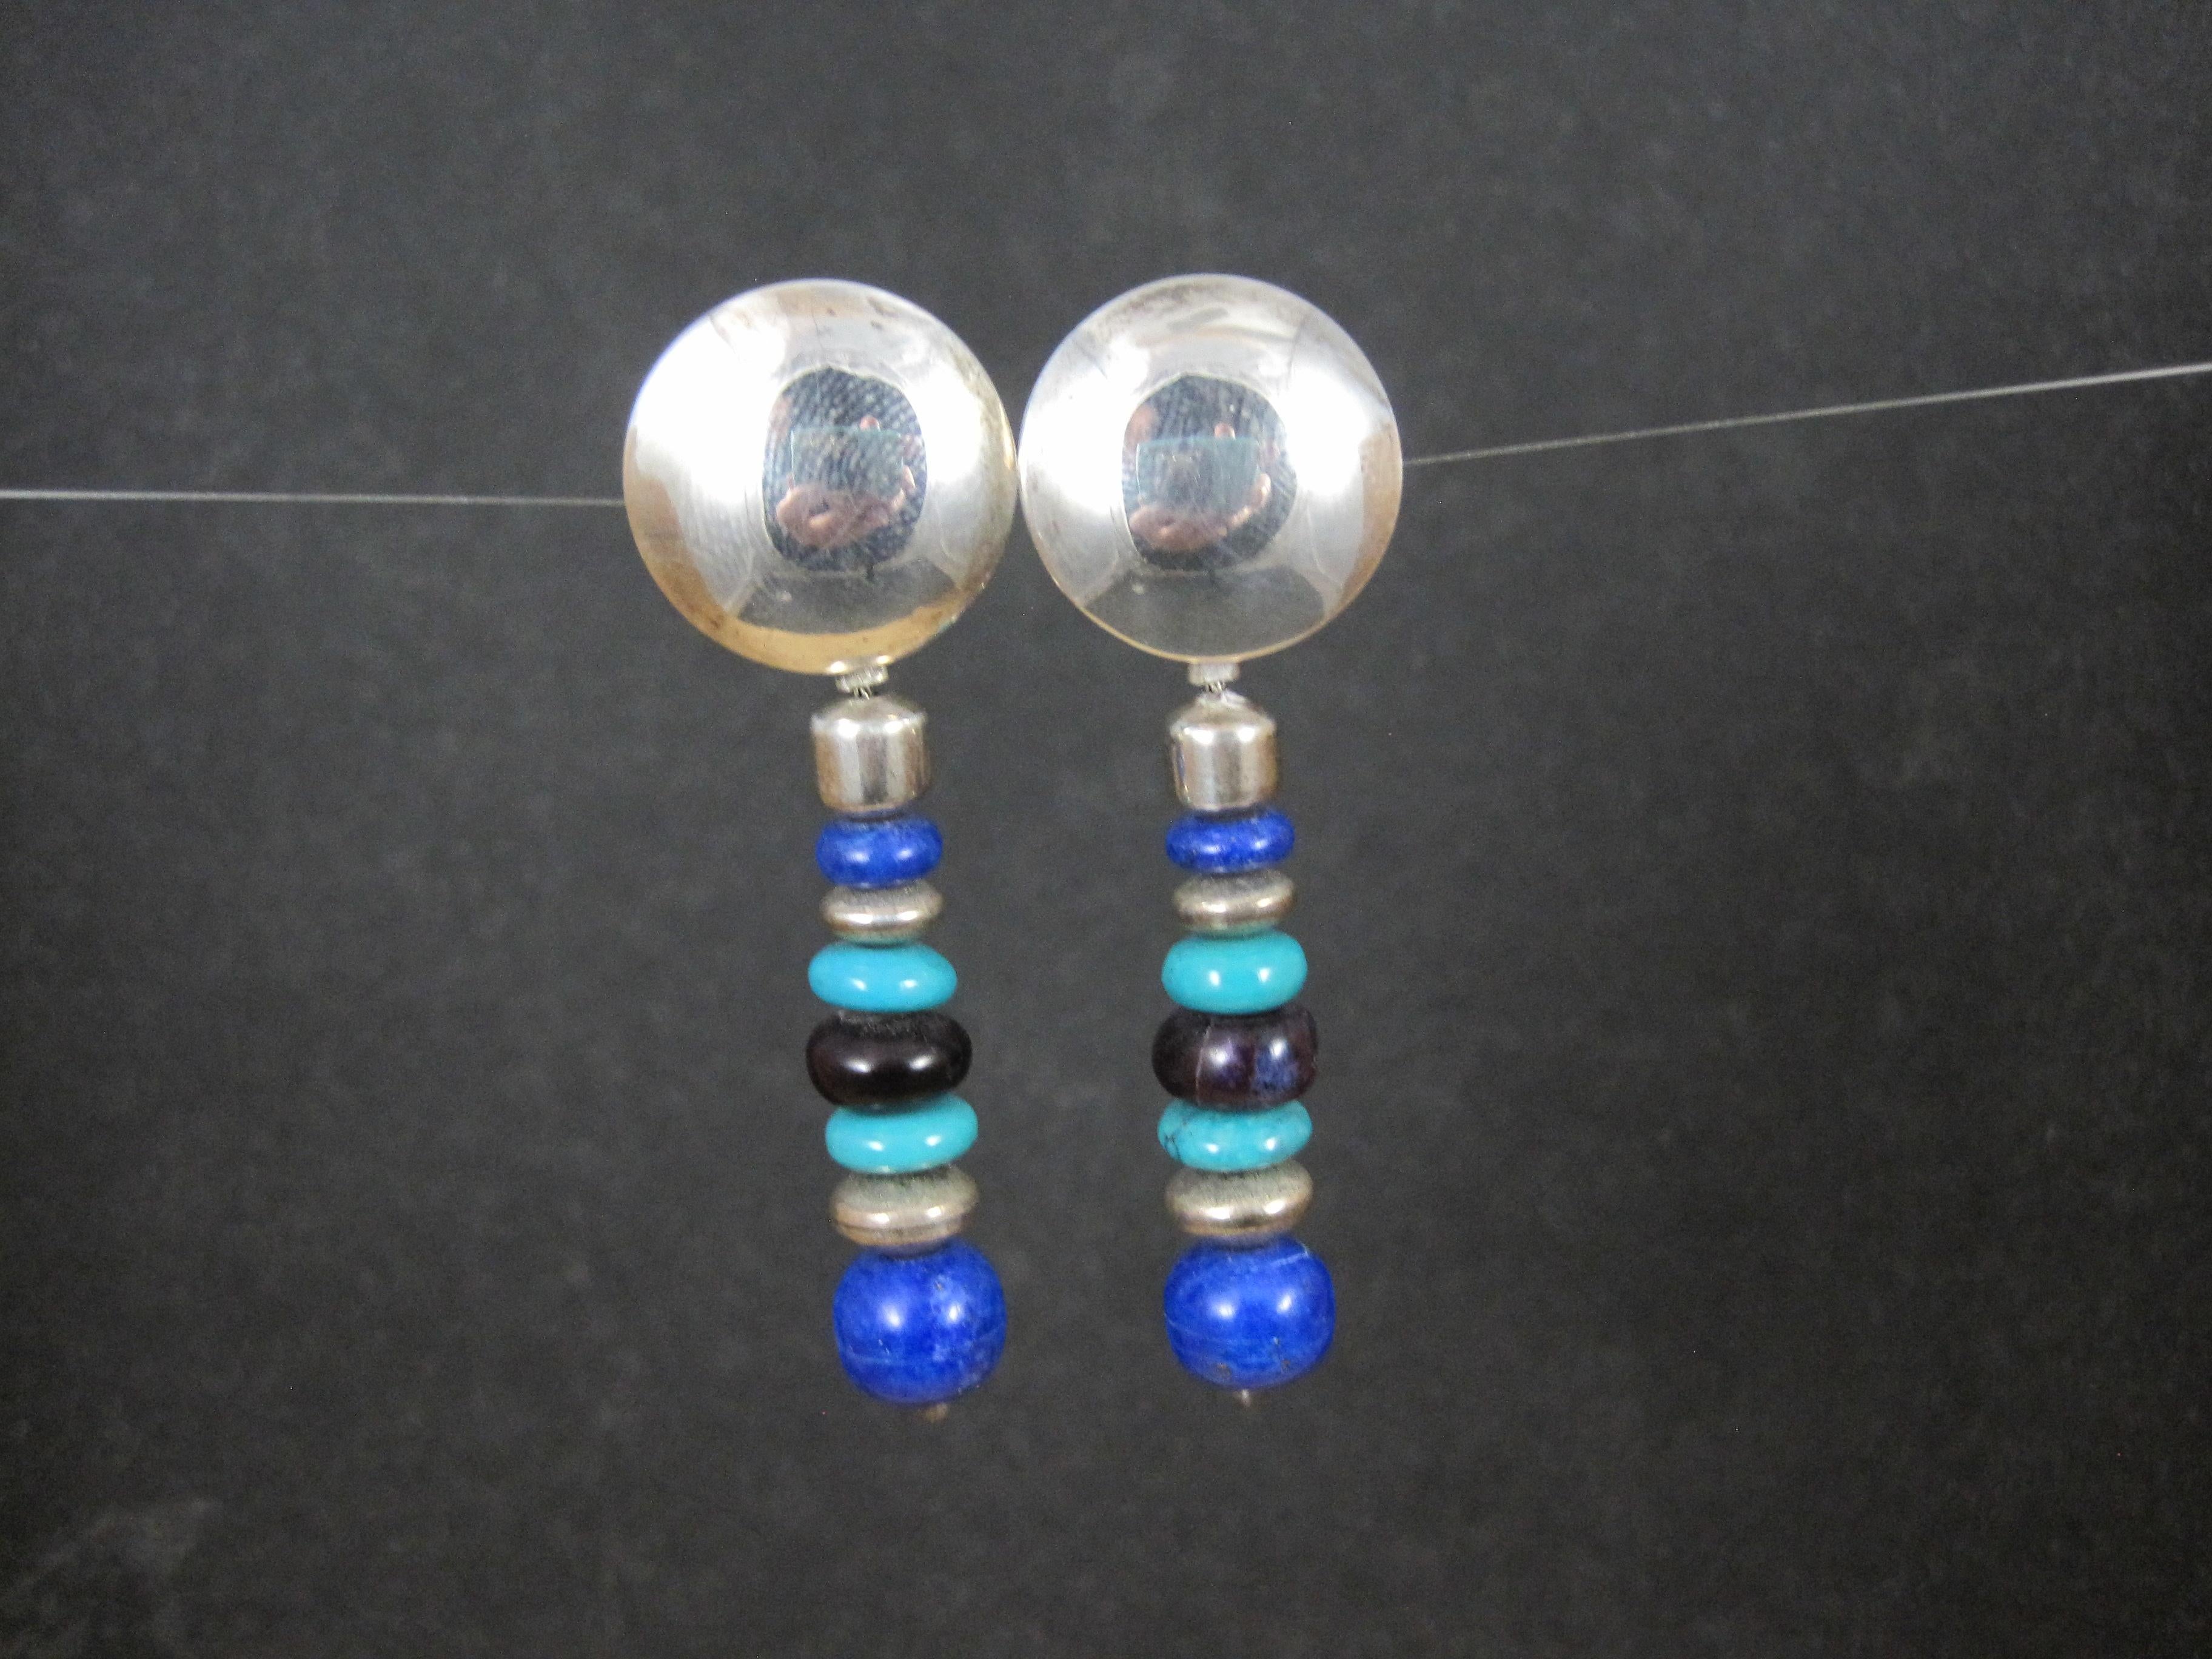 These gorgeous native american earrings are comprised of sterling silver, bright blue lapis lazuli, turquoise and charoite gemstones.

These earrings measure 3/4 of an inch at the post and 2 1/4 inches long.

Marks: None

Condition: Excellent with